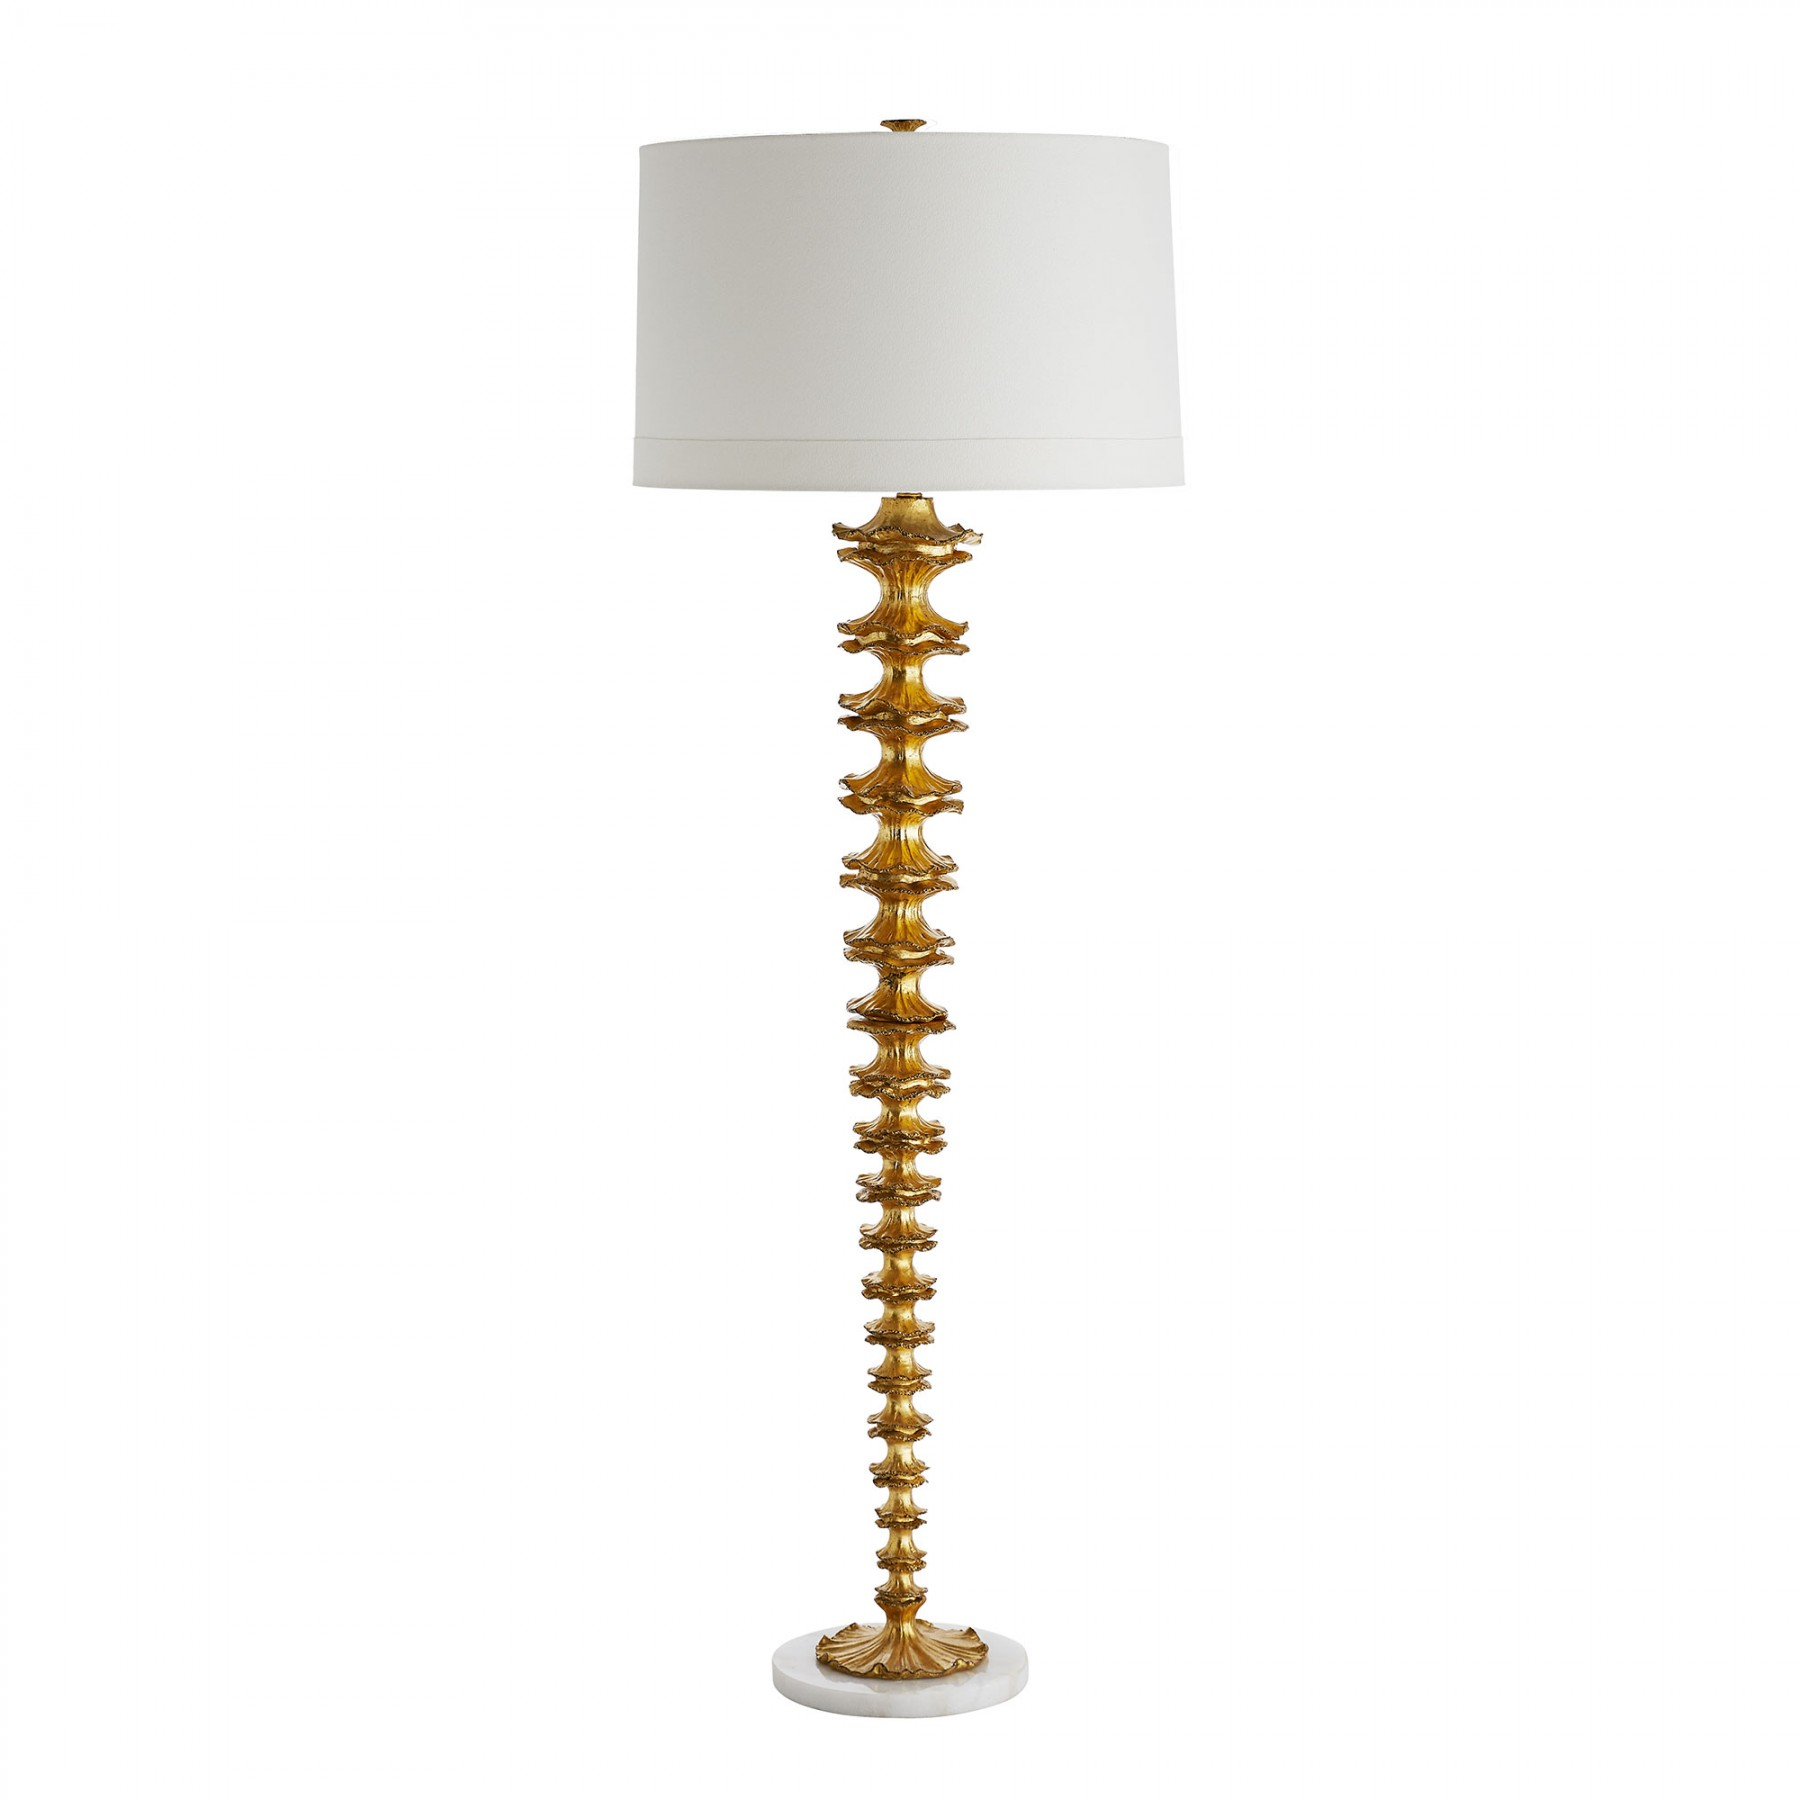 Details About 655 Tall Cilla Floor Lamp Gold Leaf Resin Tapering Disks White Marble Base with regard to sizing 1800 X 1800